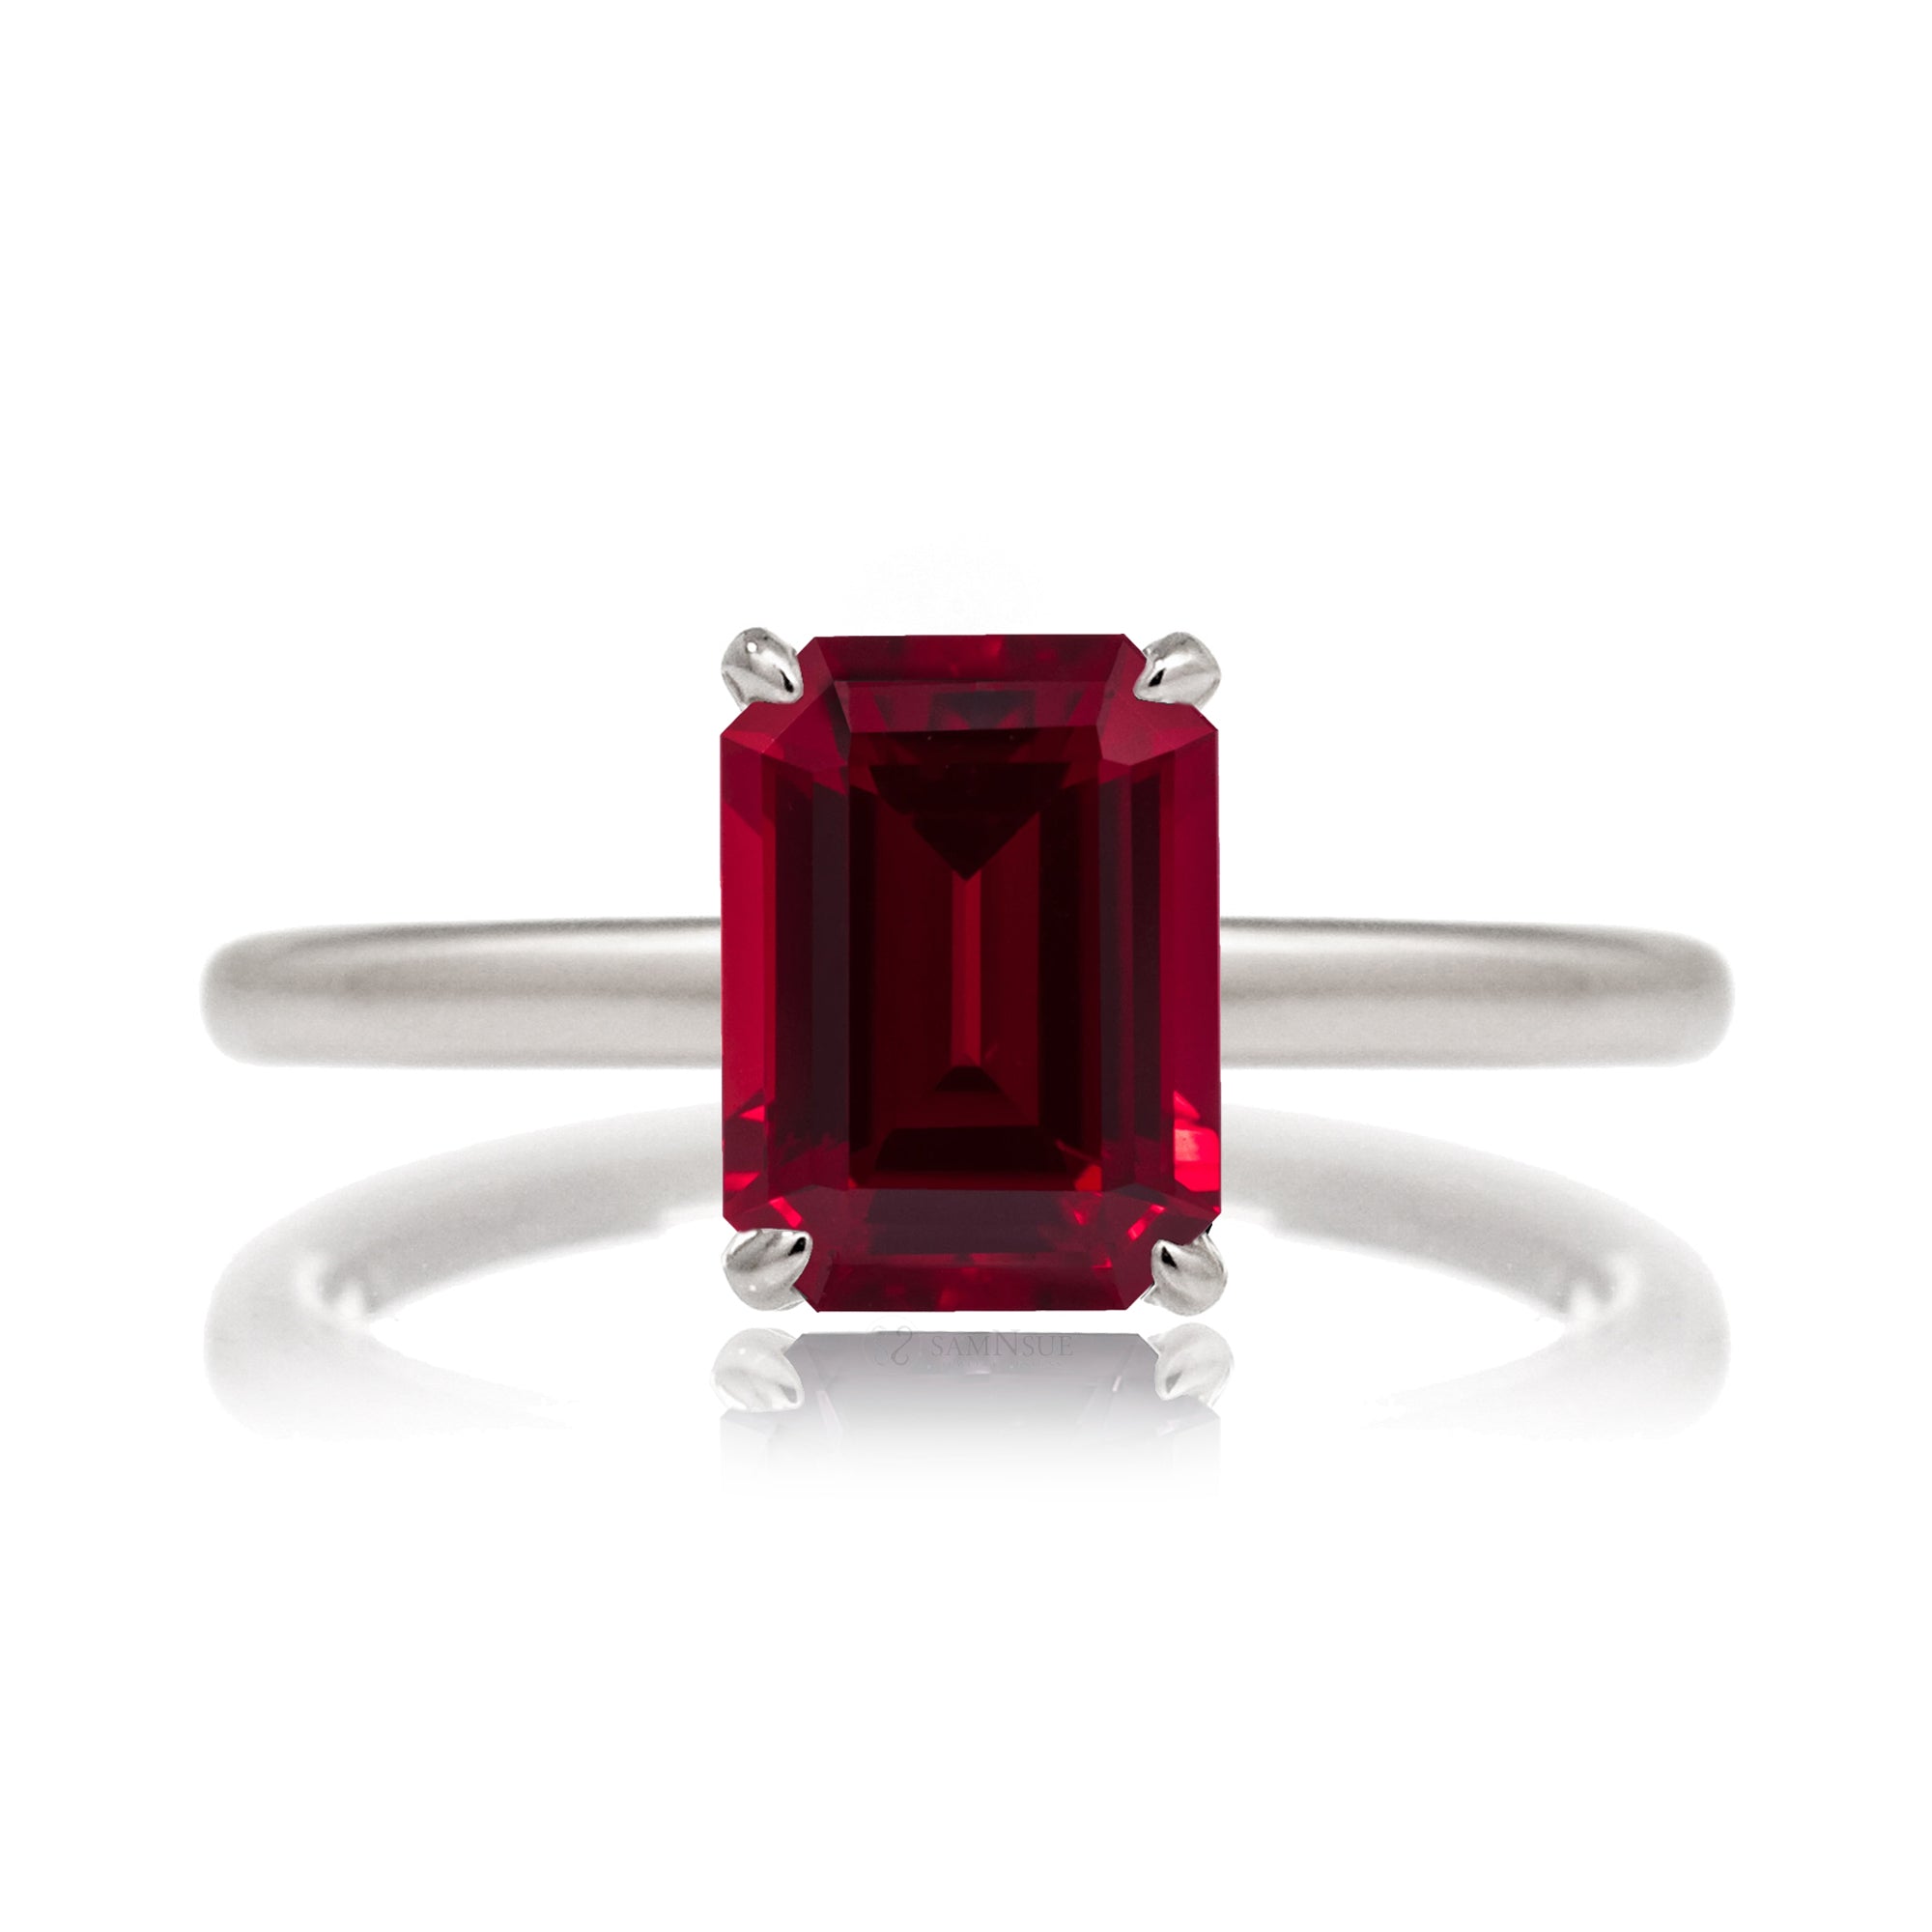 Emerald step cut ruby diamond hidden halo engagement ring in white gold